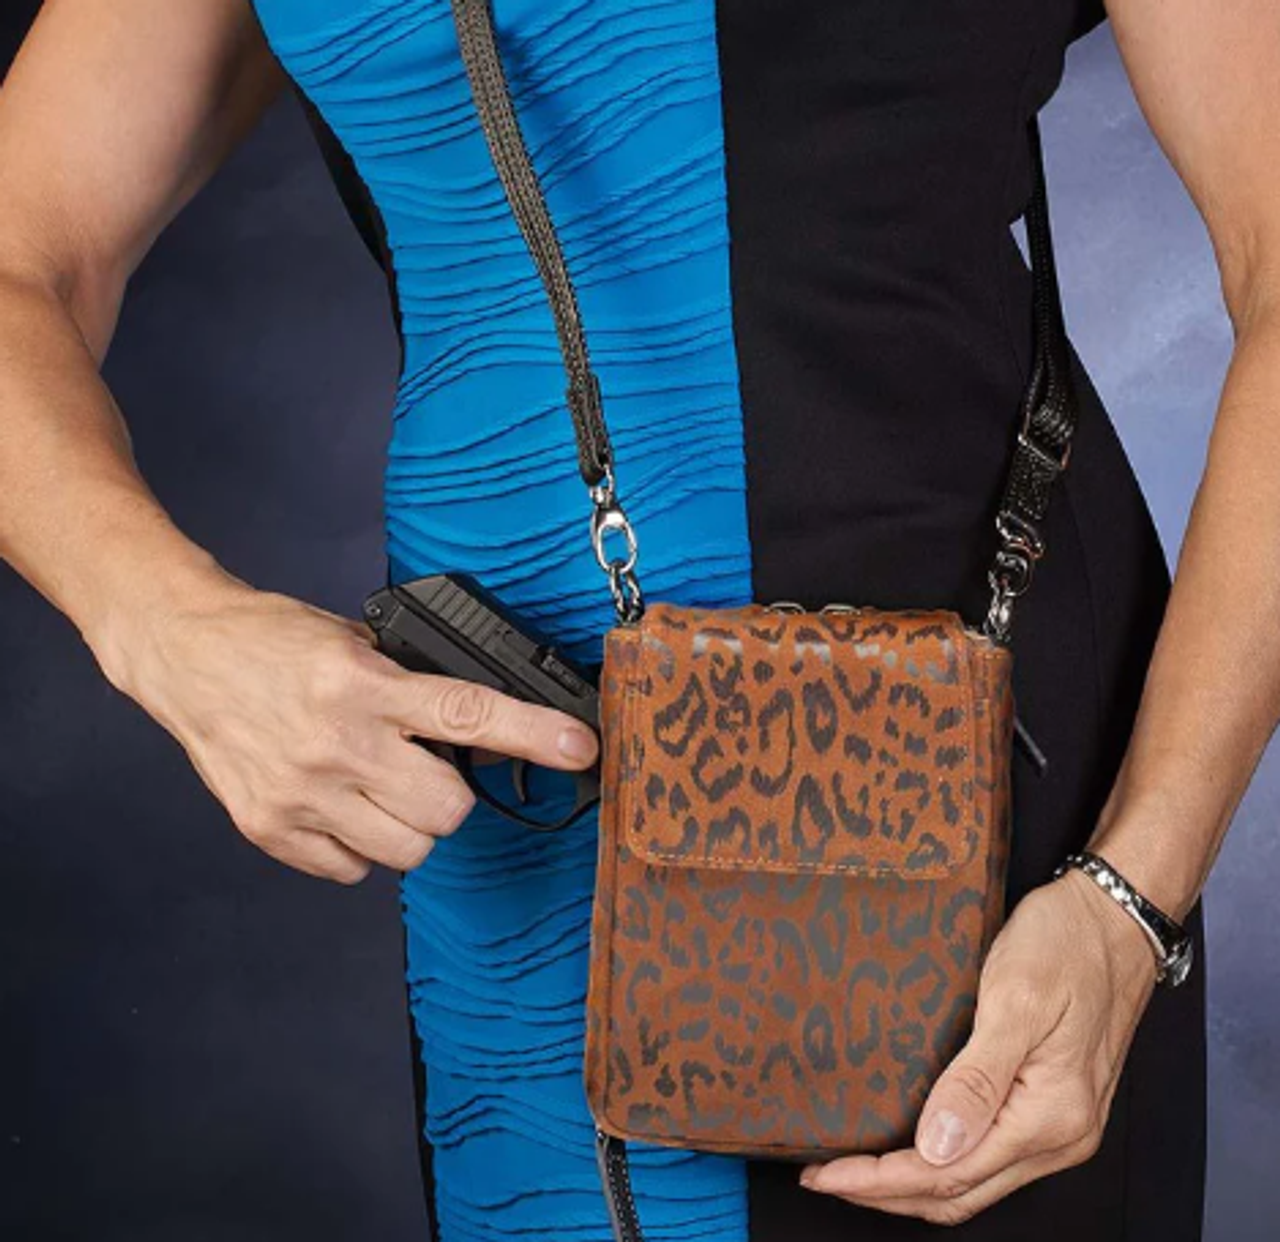 Tips for Concealed carry purse use - YouTube